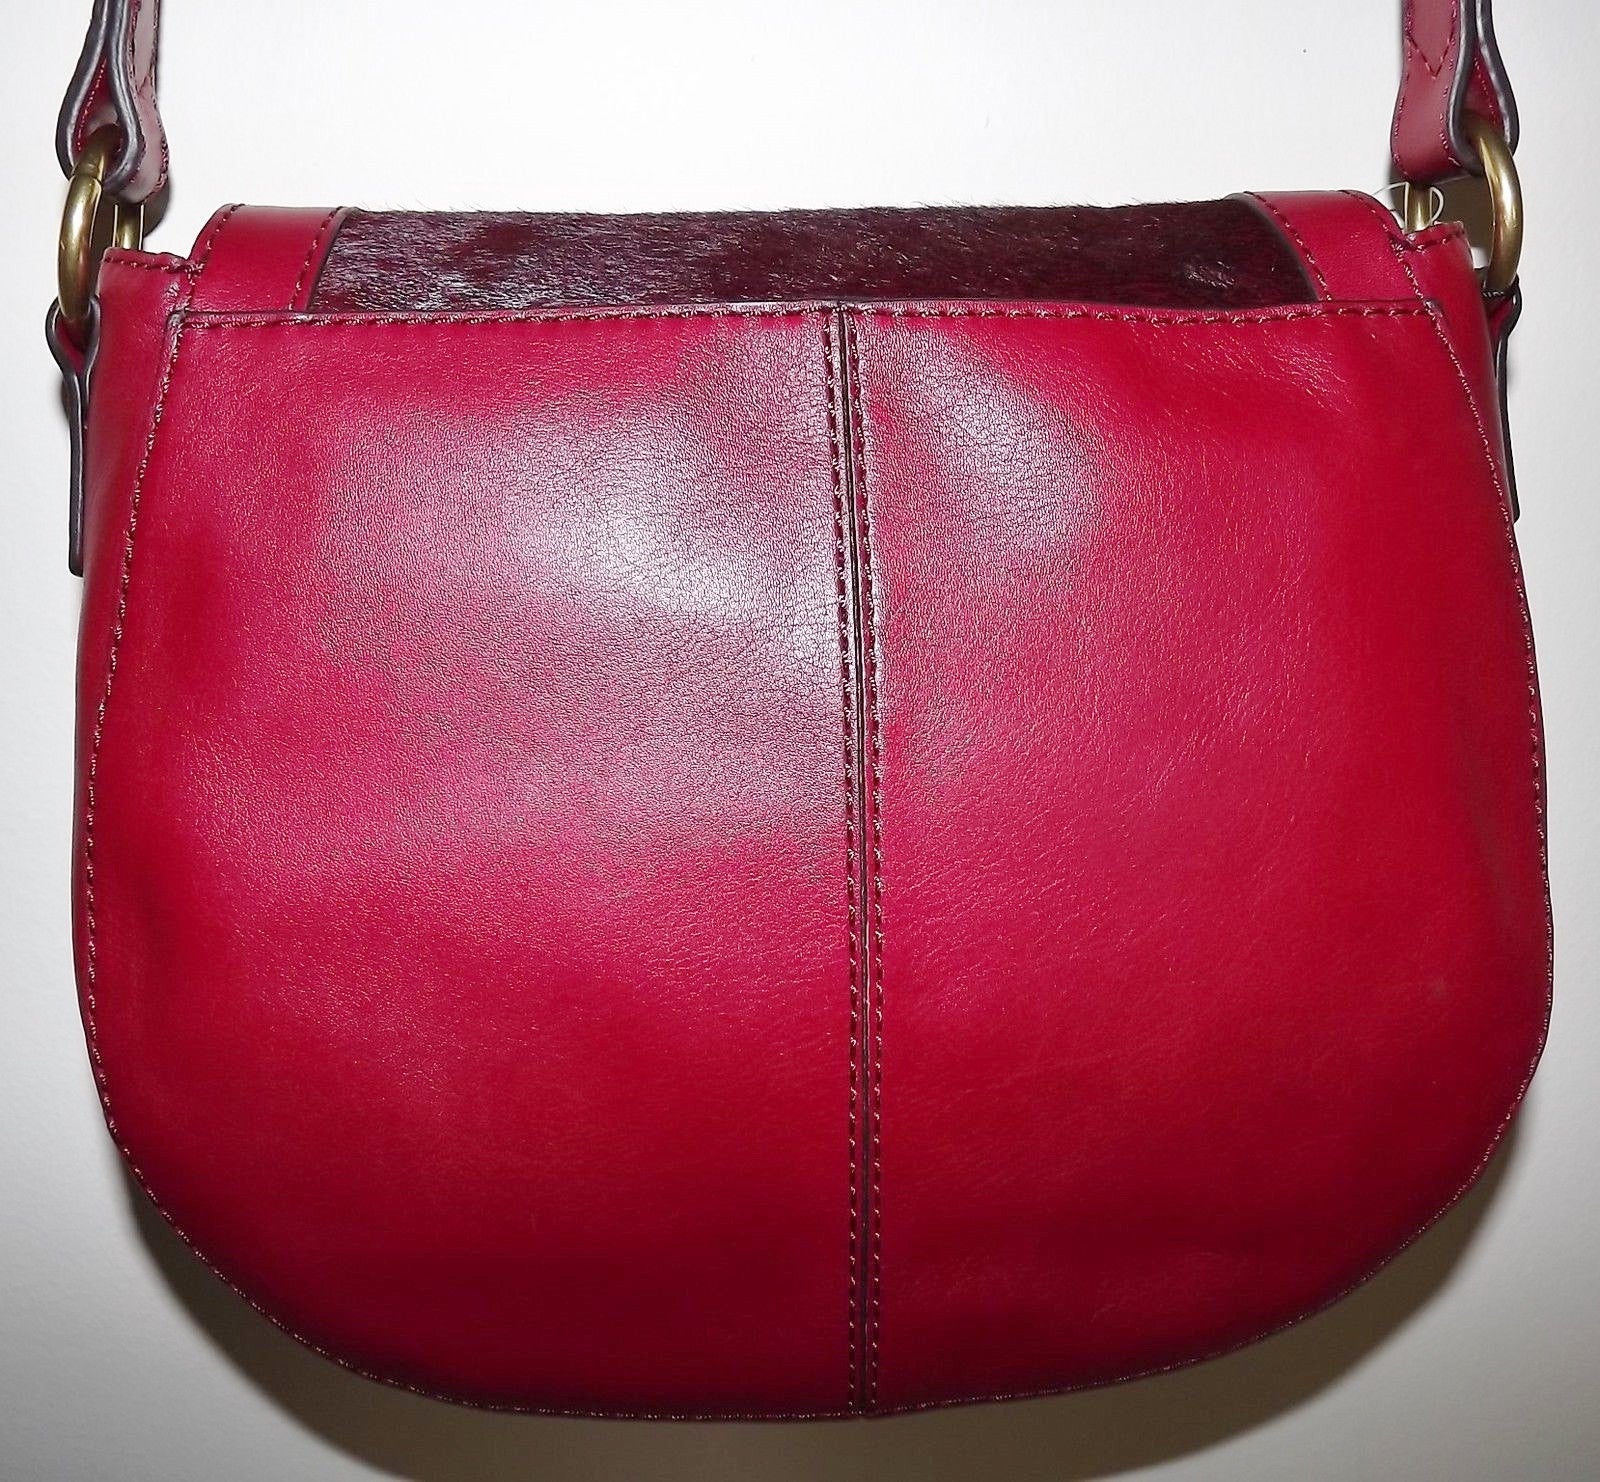 Fossil | Bags | Fossil Tote Bag Pink Red Large Purse Zip | Poshmark